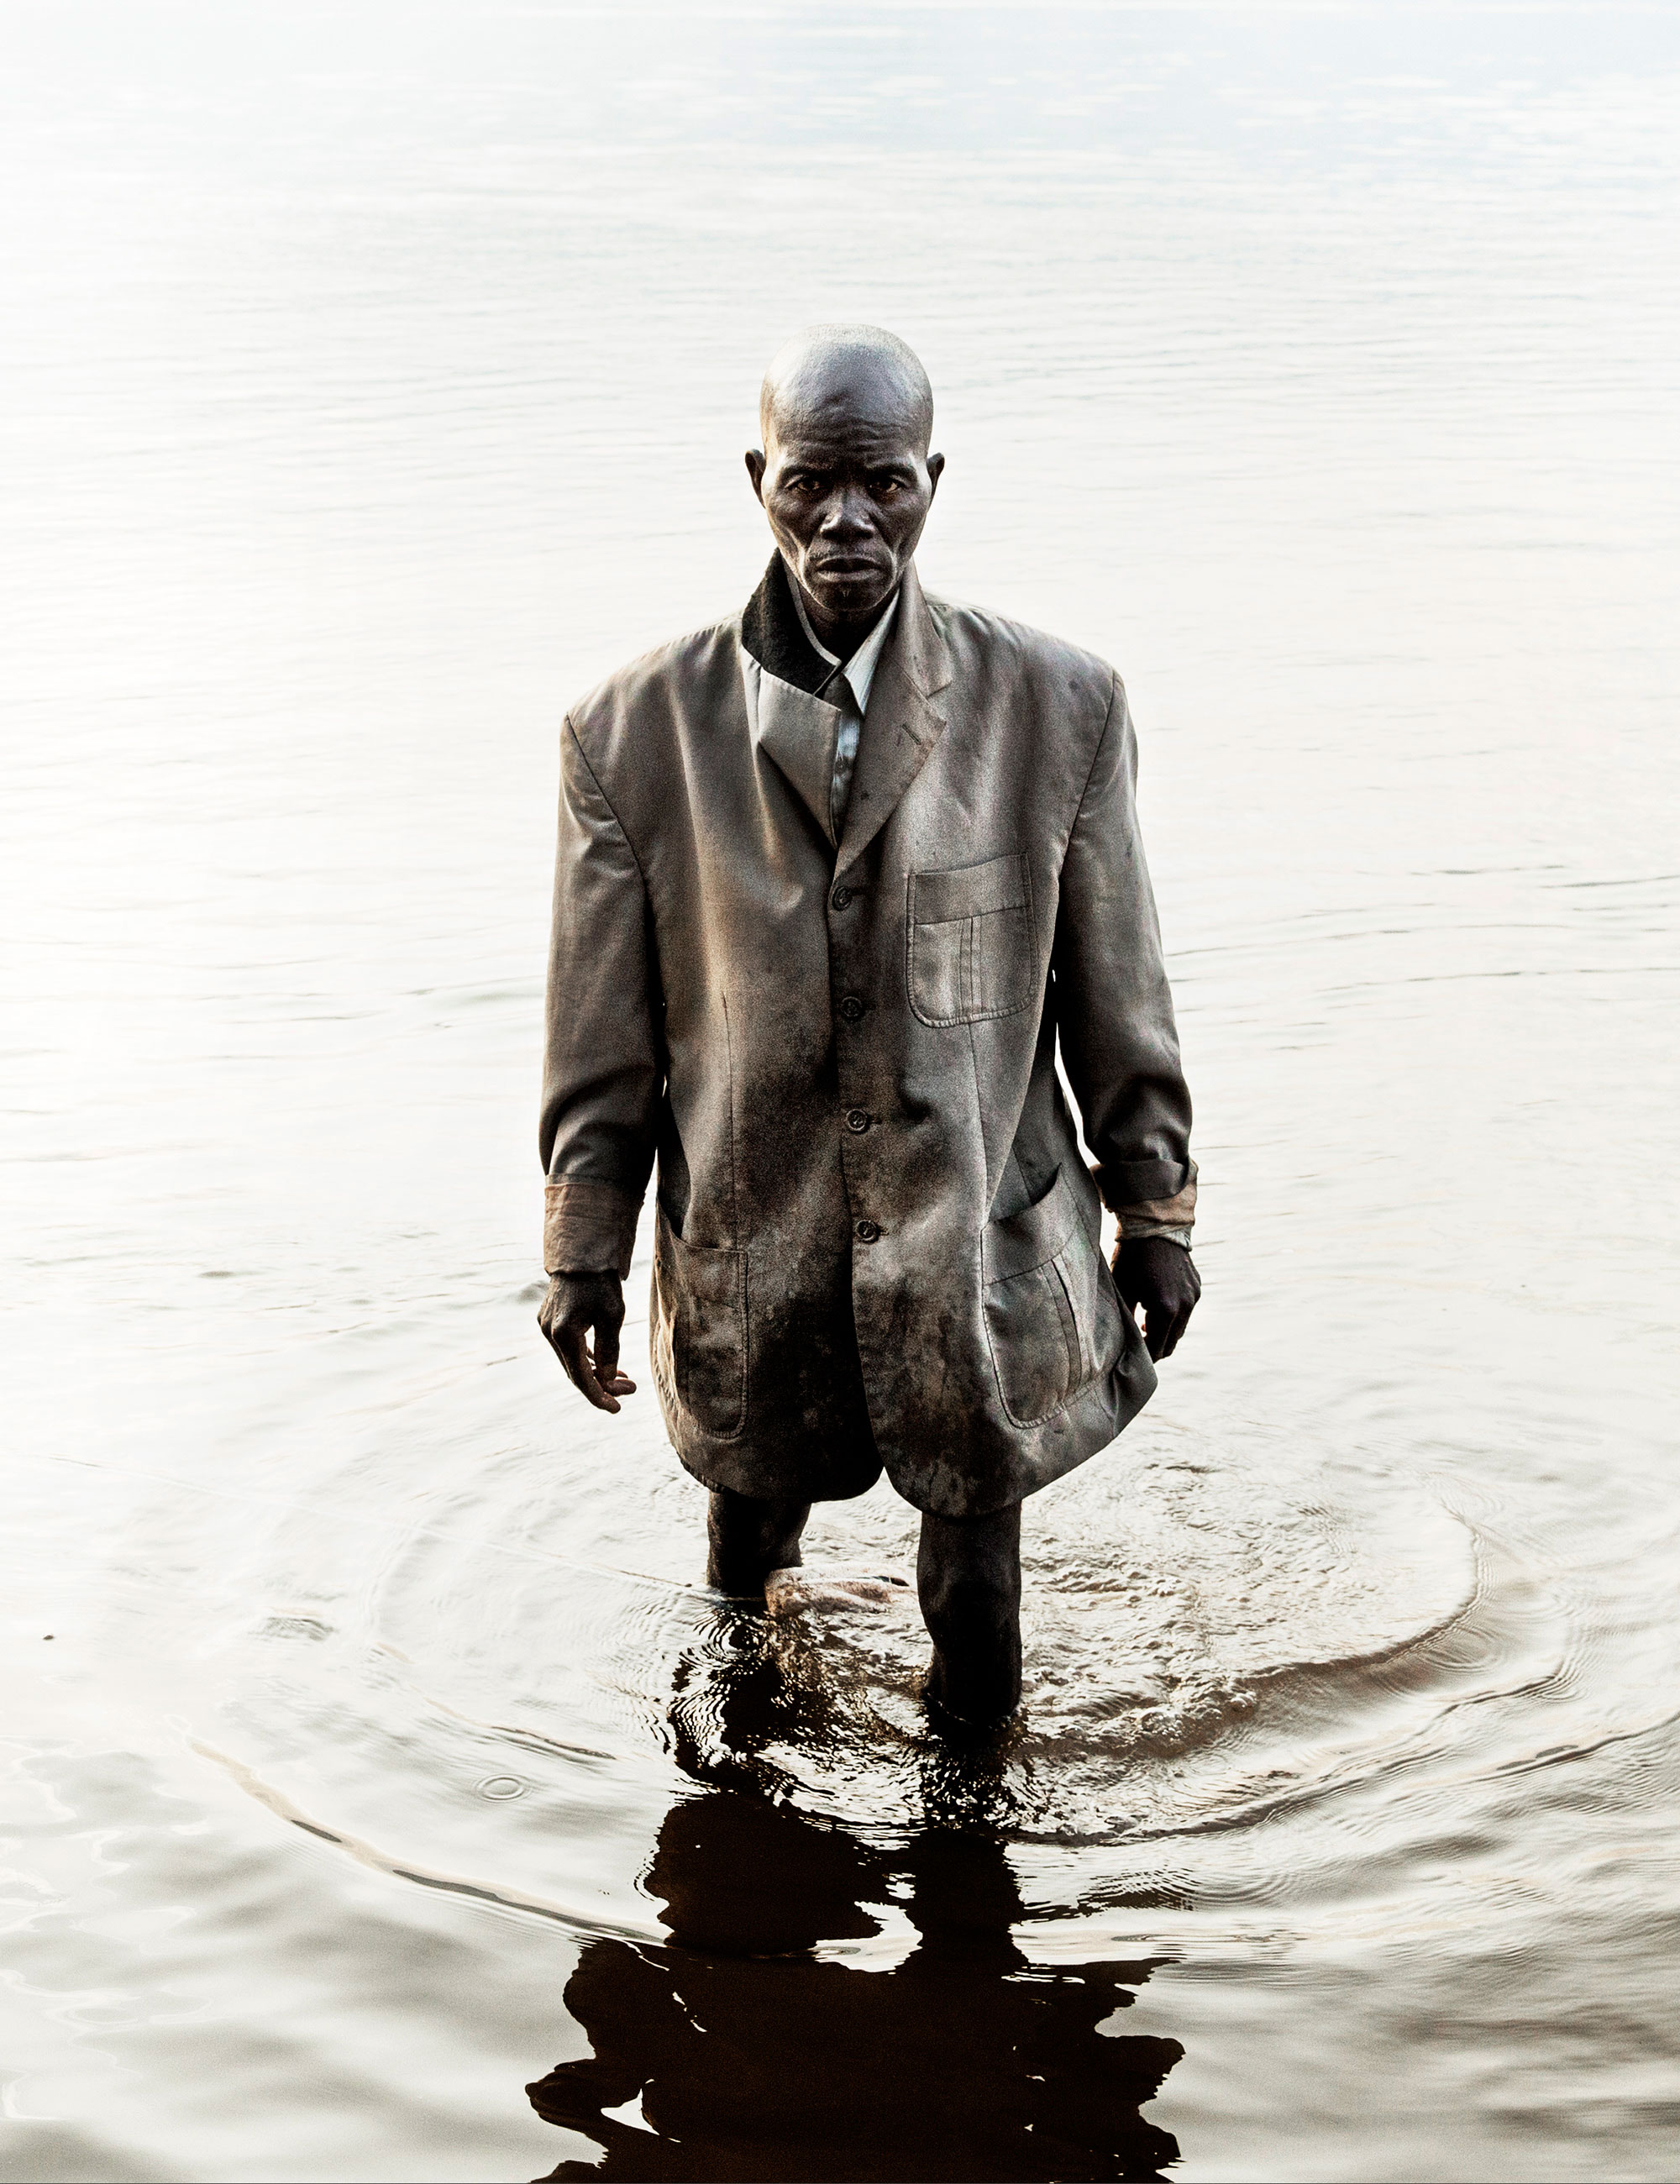 A fisherman dressed for Sunday Mass walks in the UbanguiRiver in the early morning.